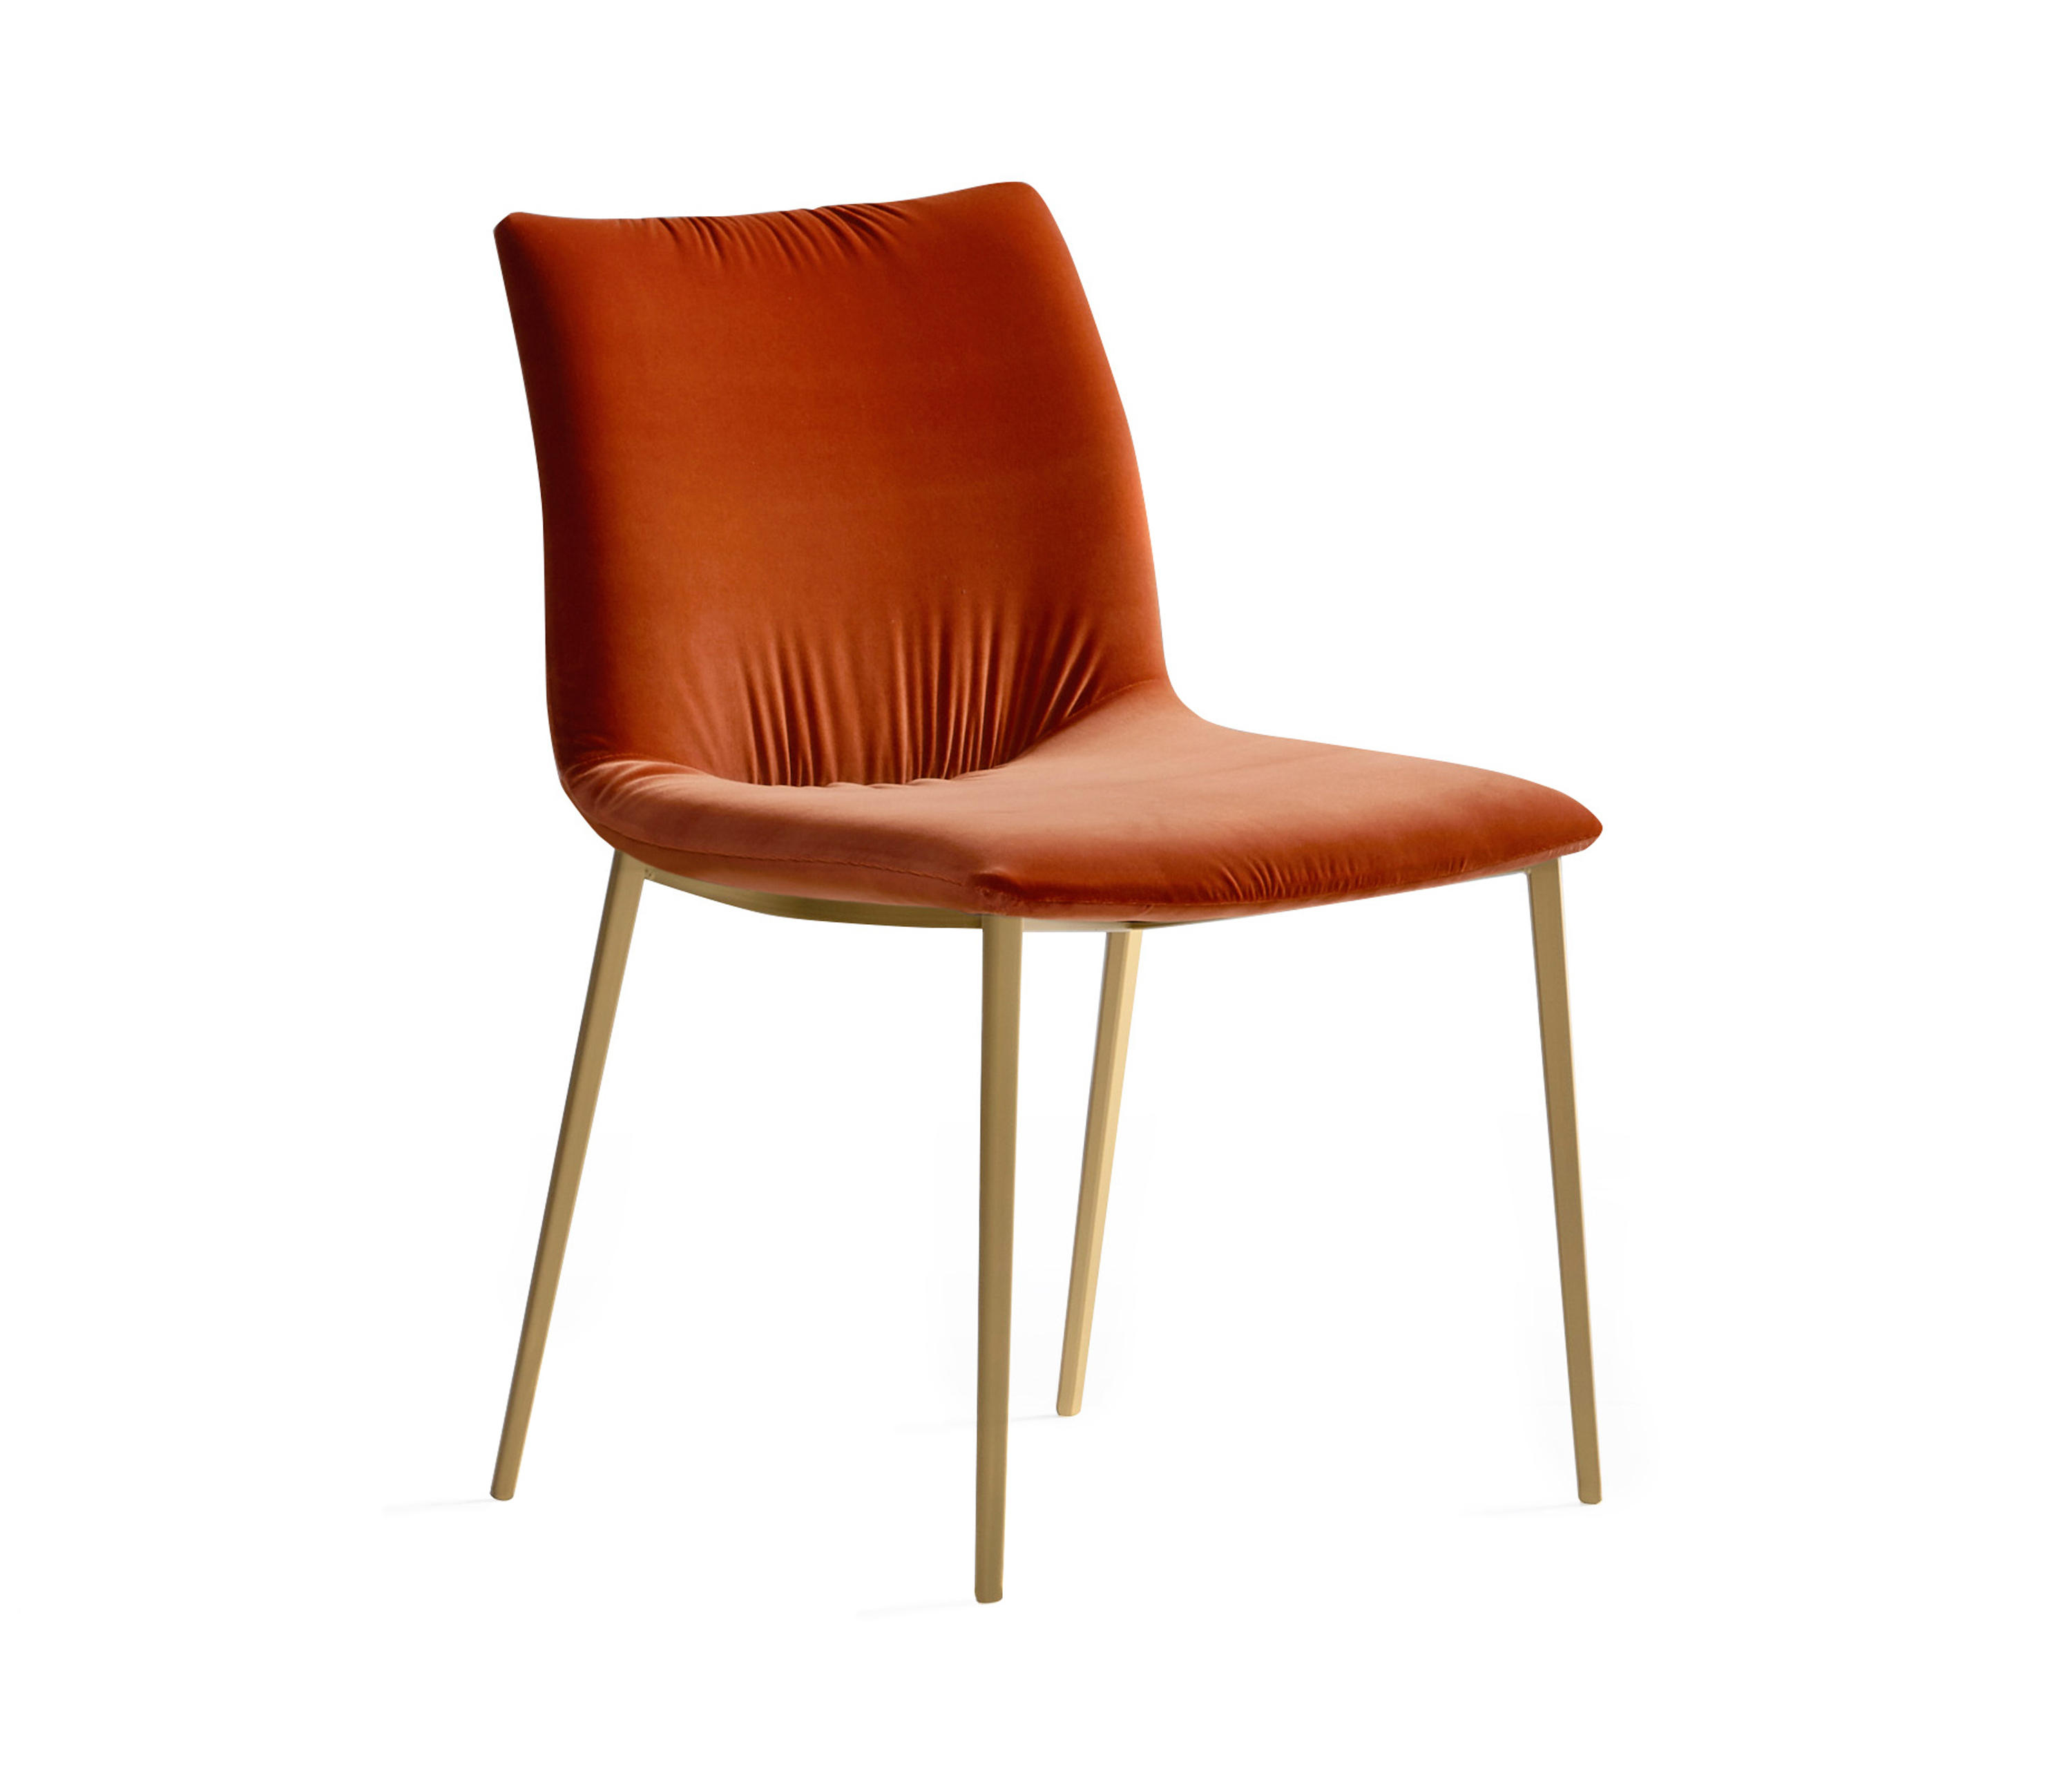 NIRVANA CHAIR - Chairs from Ronda design | Architonic